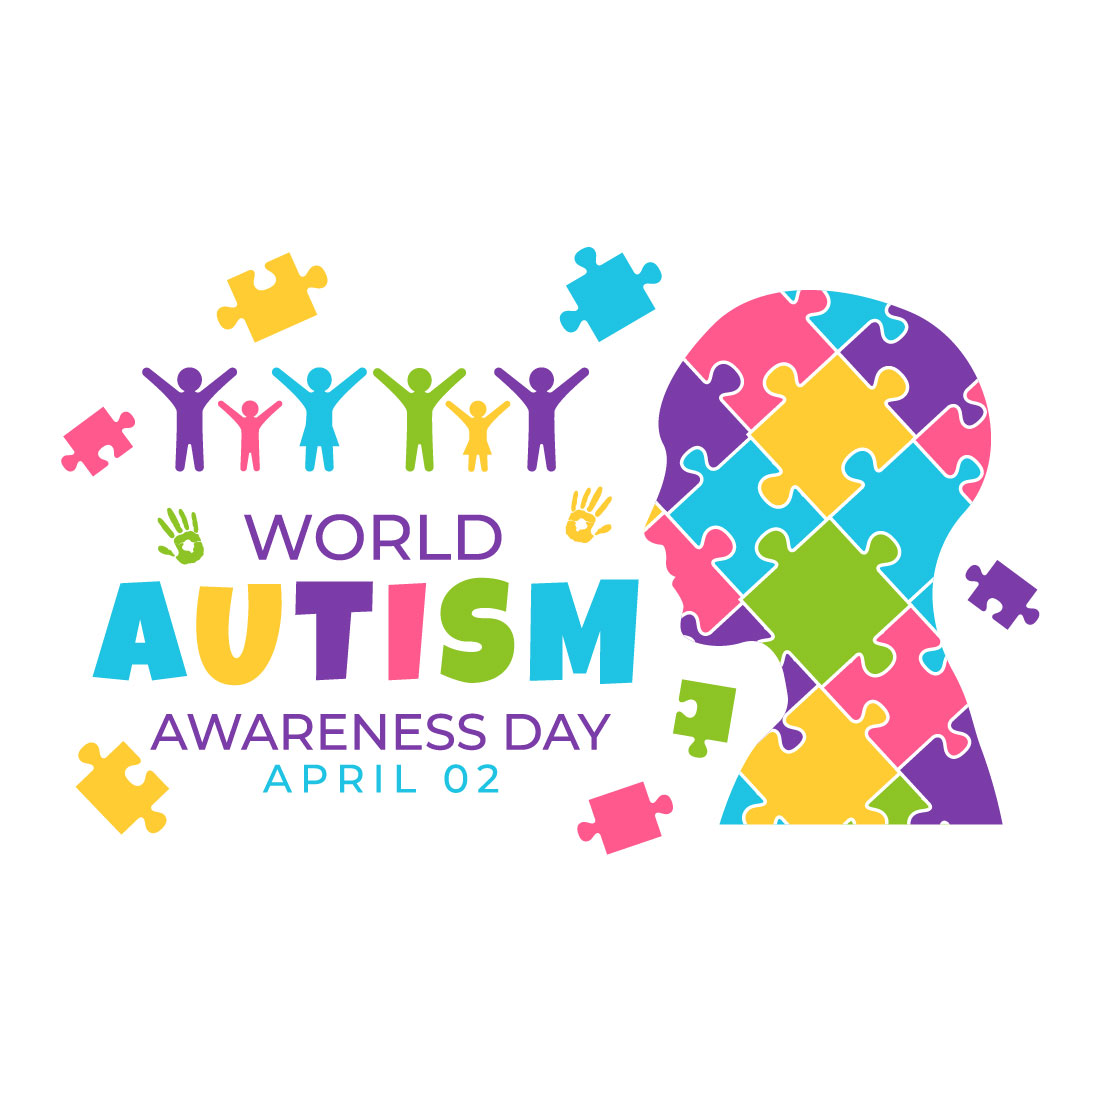 14 World Autism Awareness Day Illustration preview image.